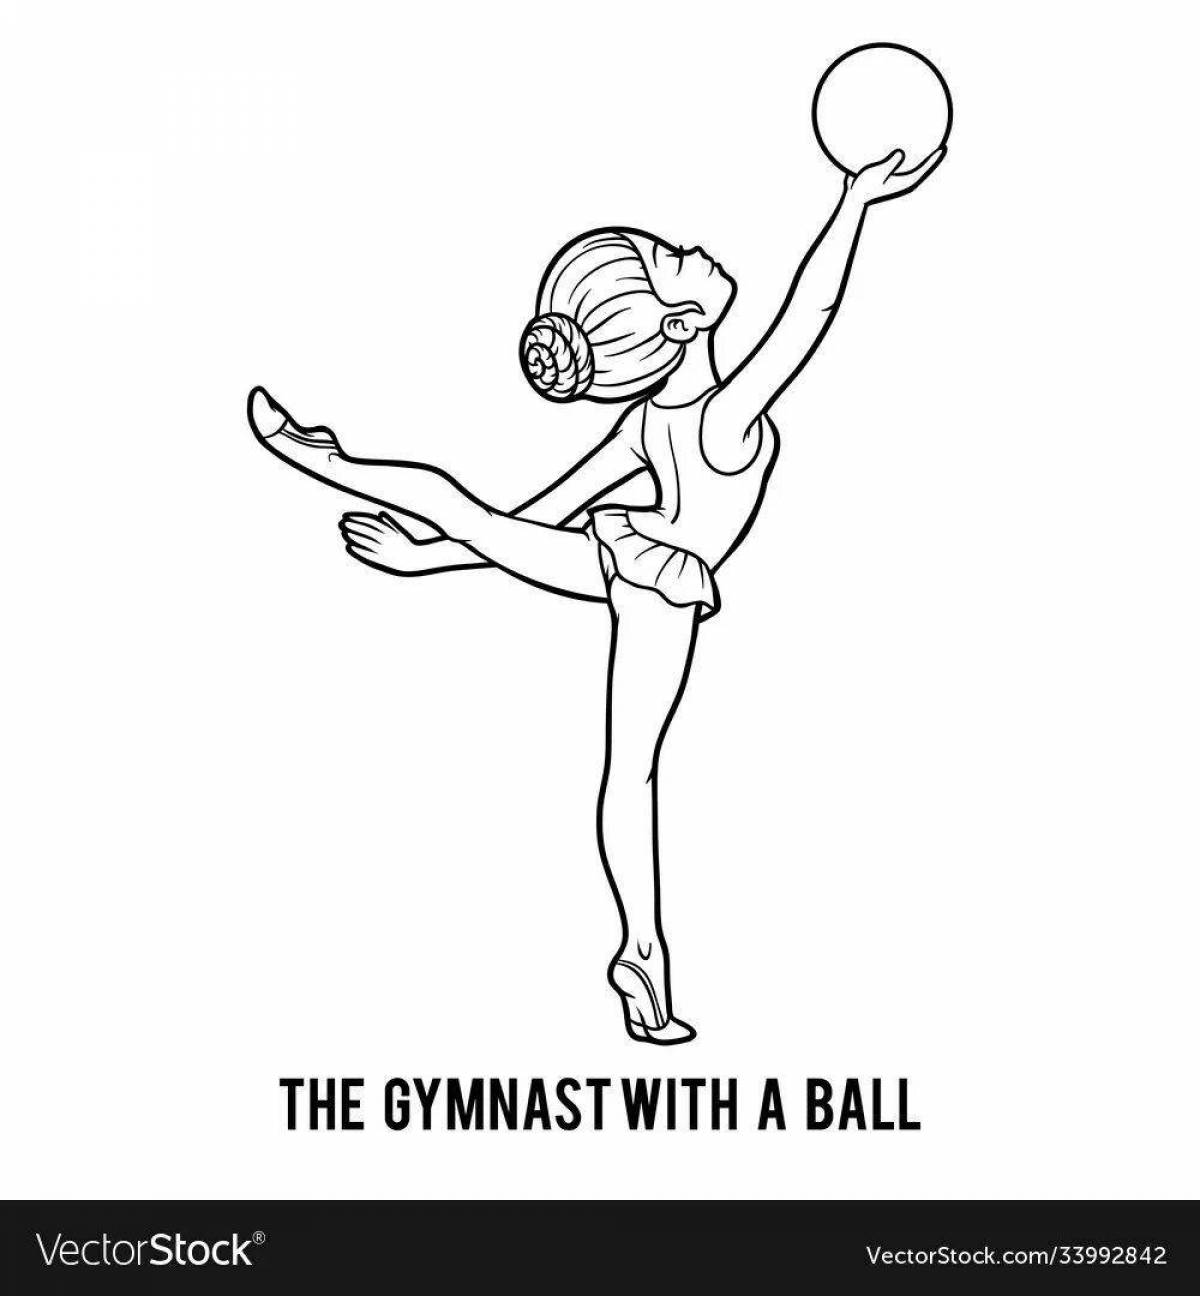 Coloring book magical gymnastics for girls